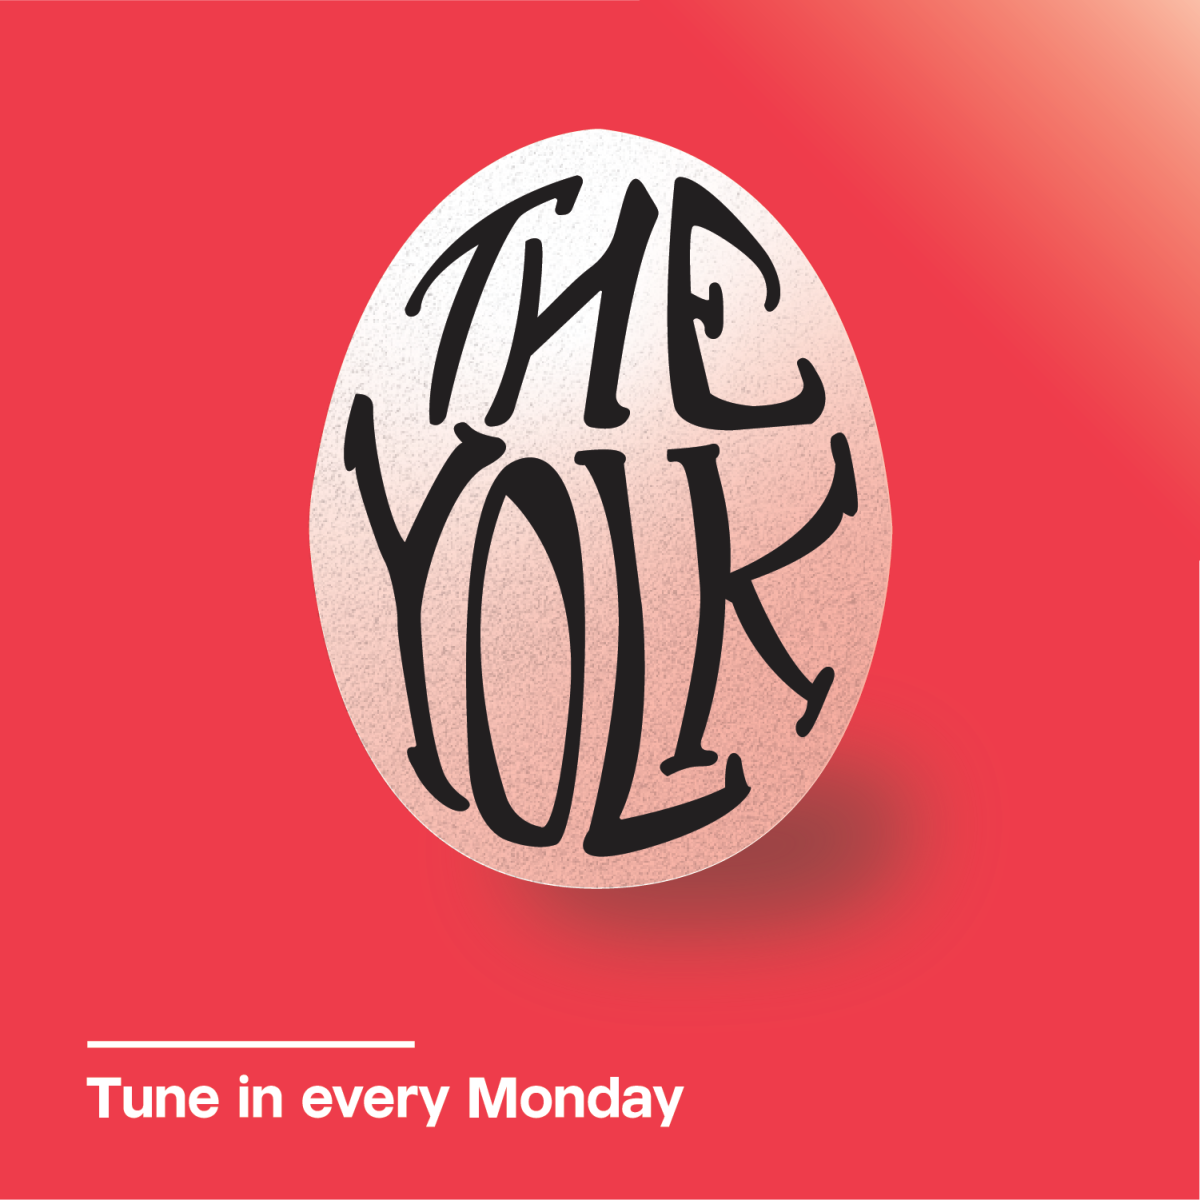 The Yolk: The arts, ghosts and doors